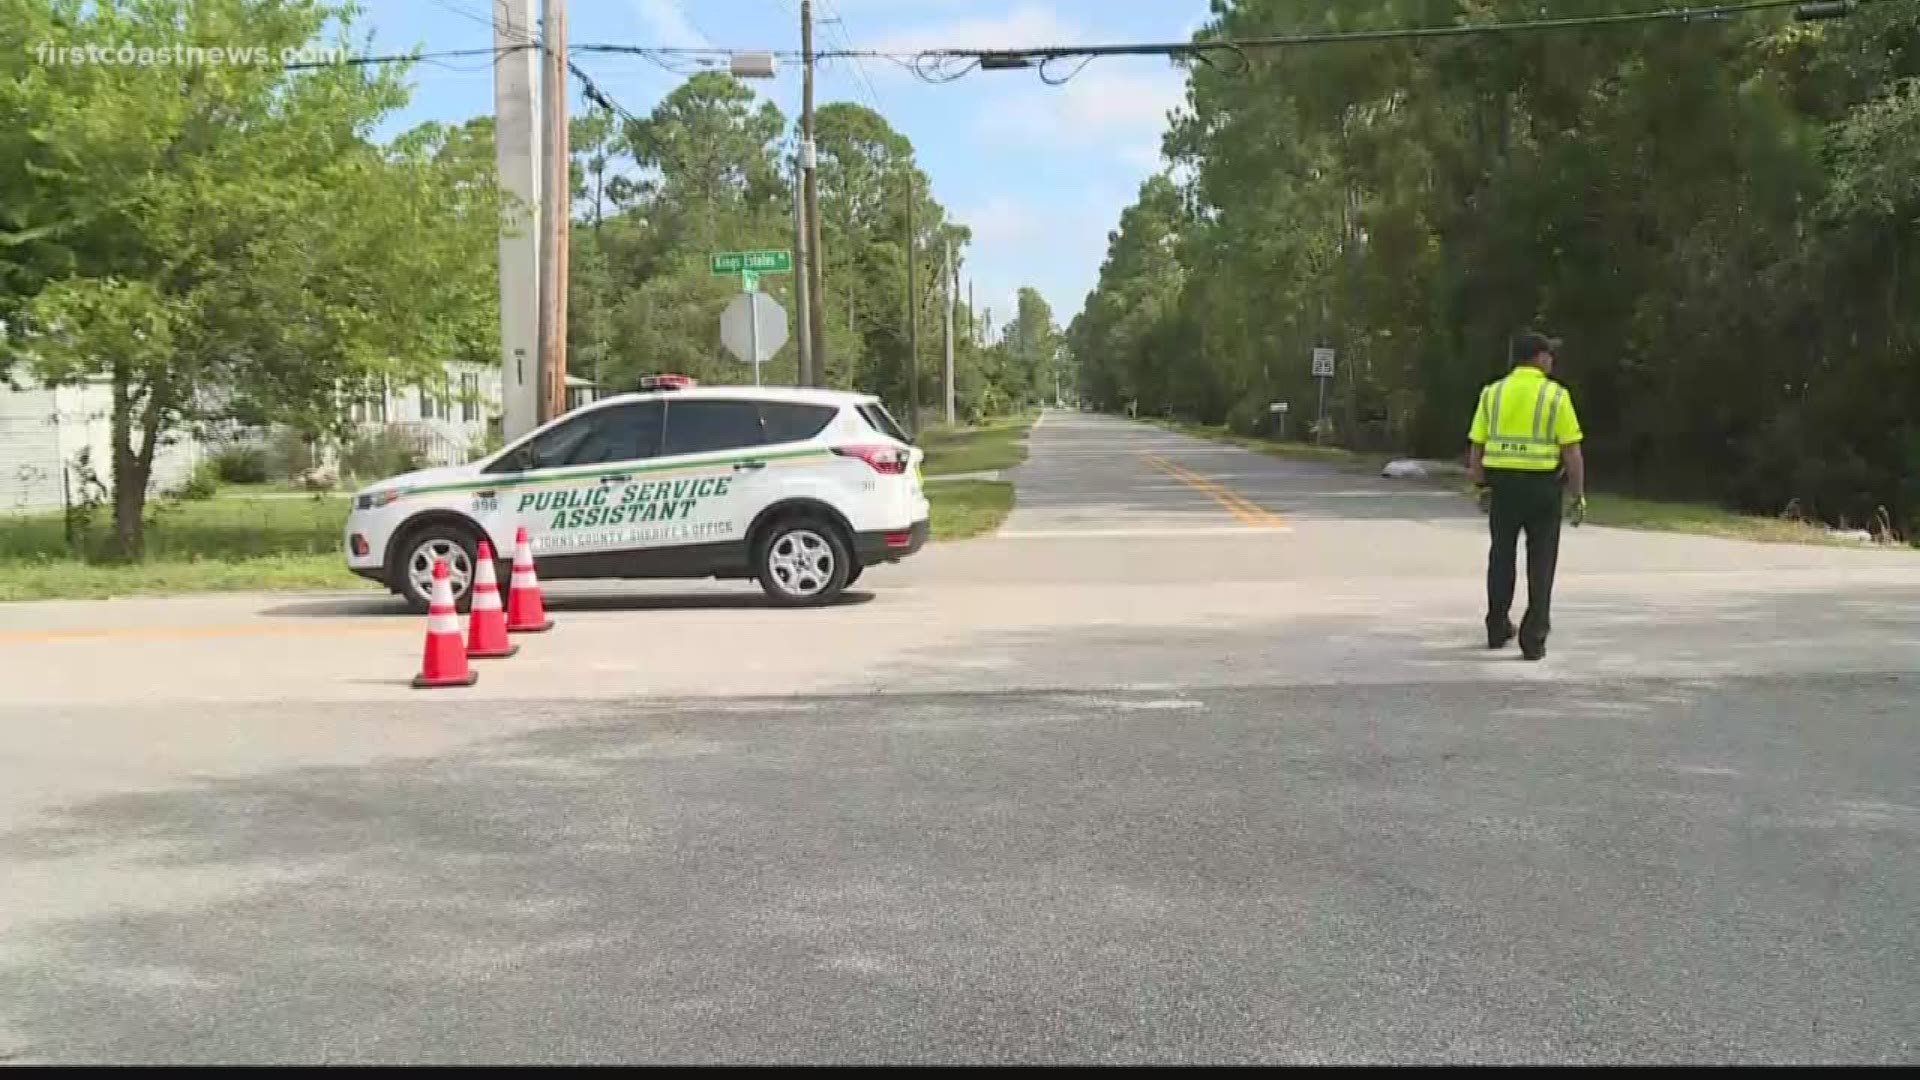 The man died after the stolen vehicle flipped in St. Johns County. A woman is being treated in the hospital.